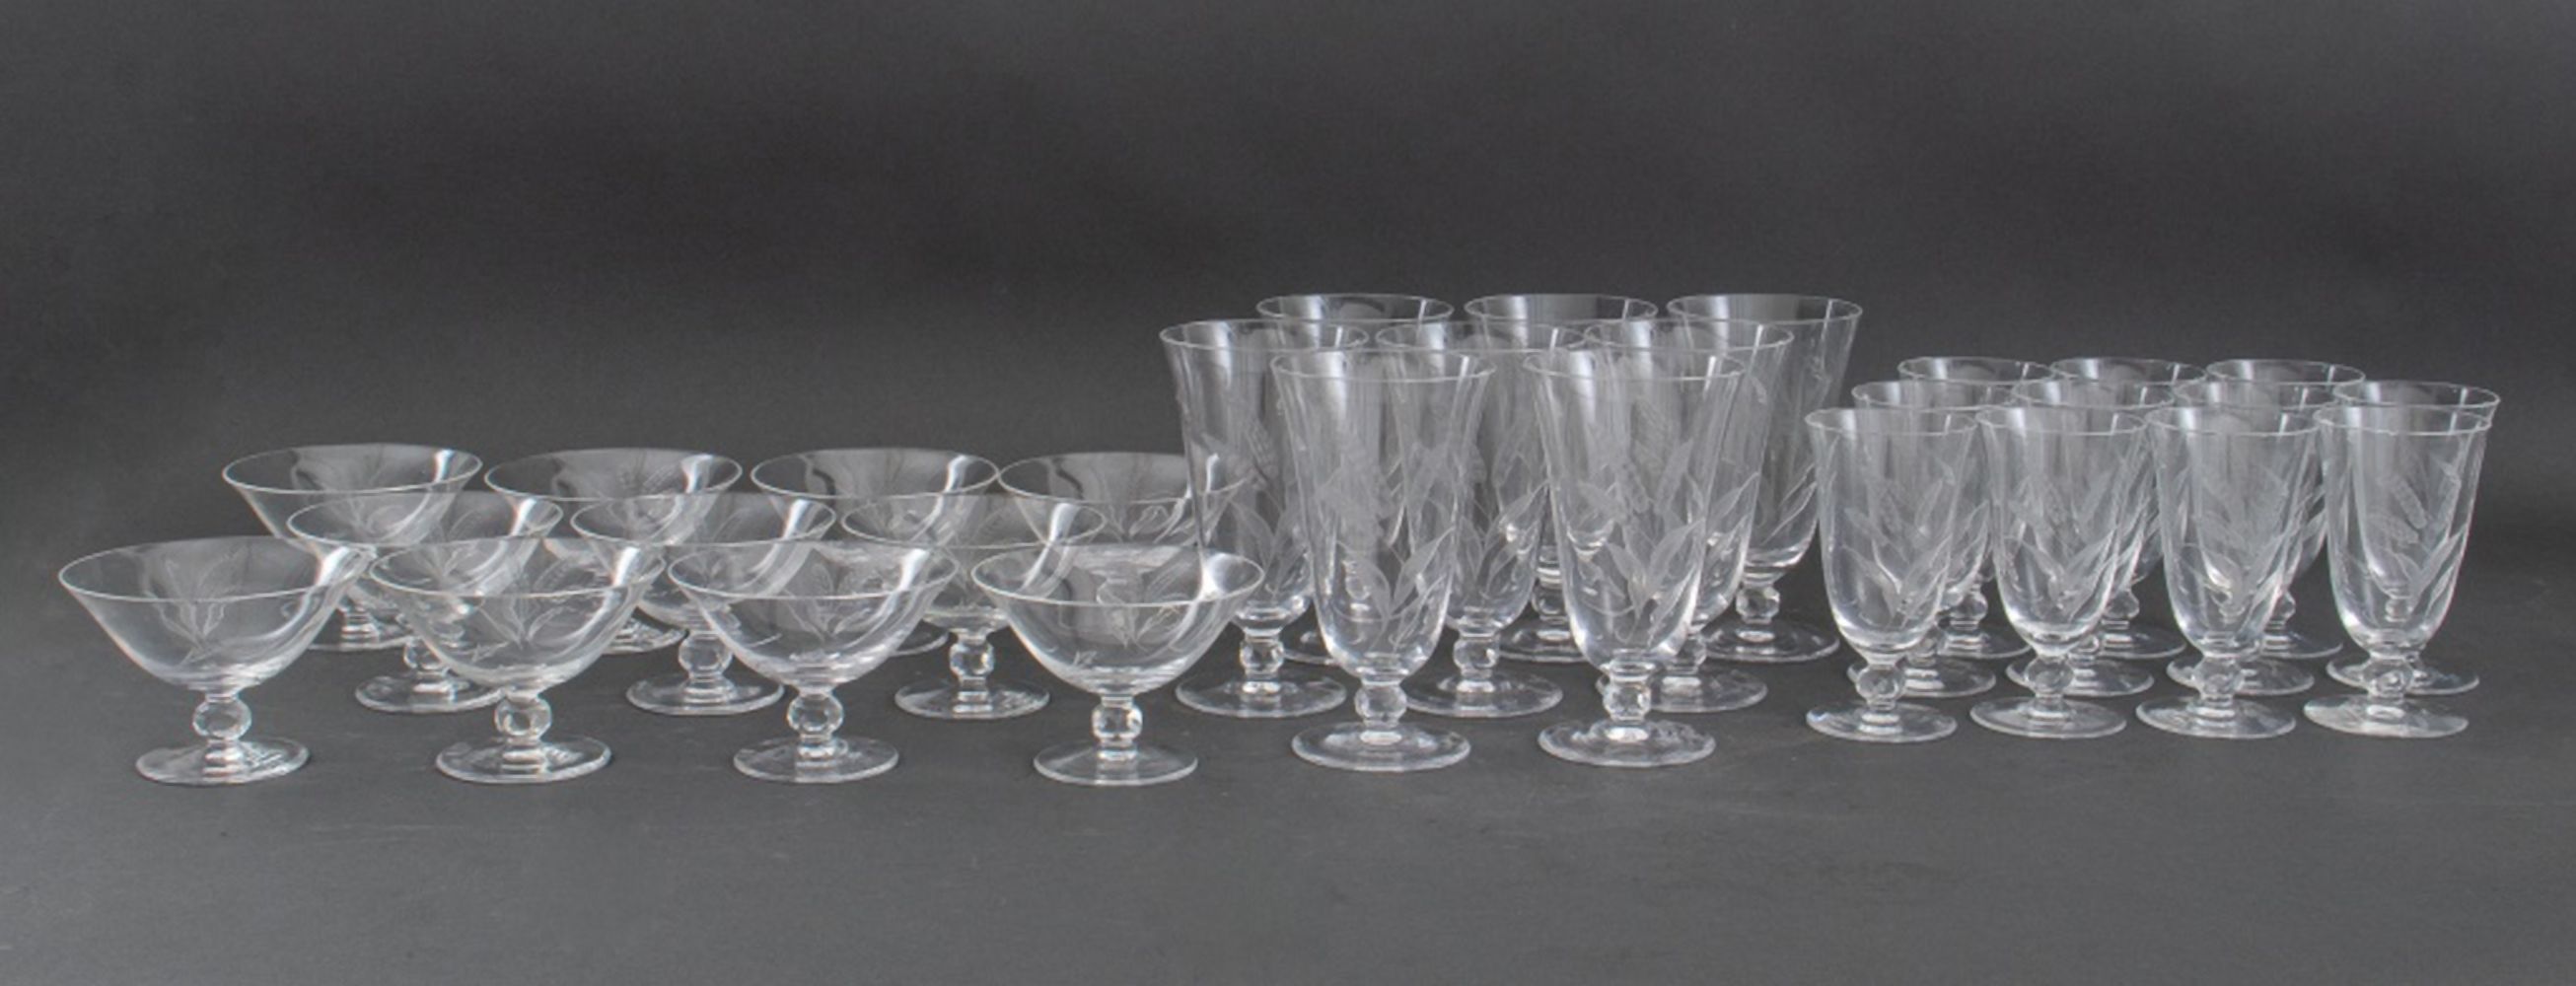 ROSENTHAL "DIGNITY" PARTIAL GLASSWARE